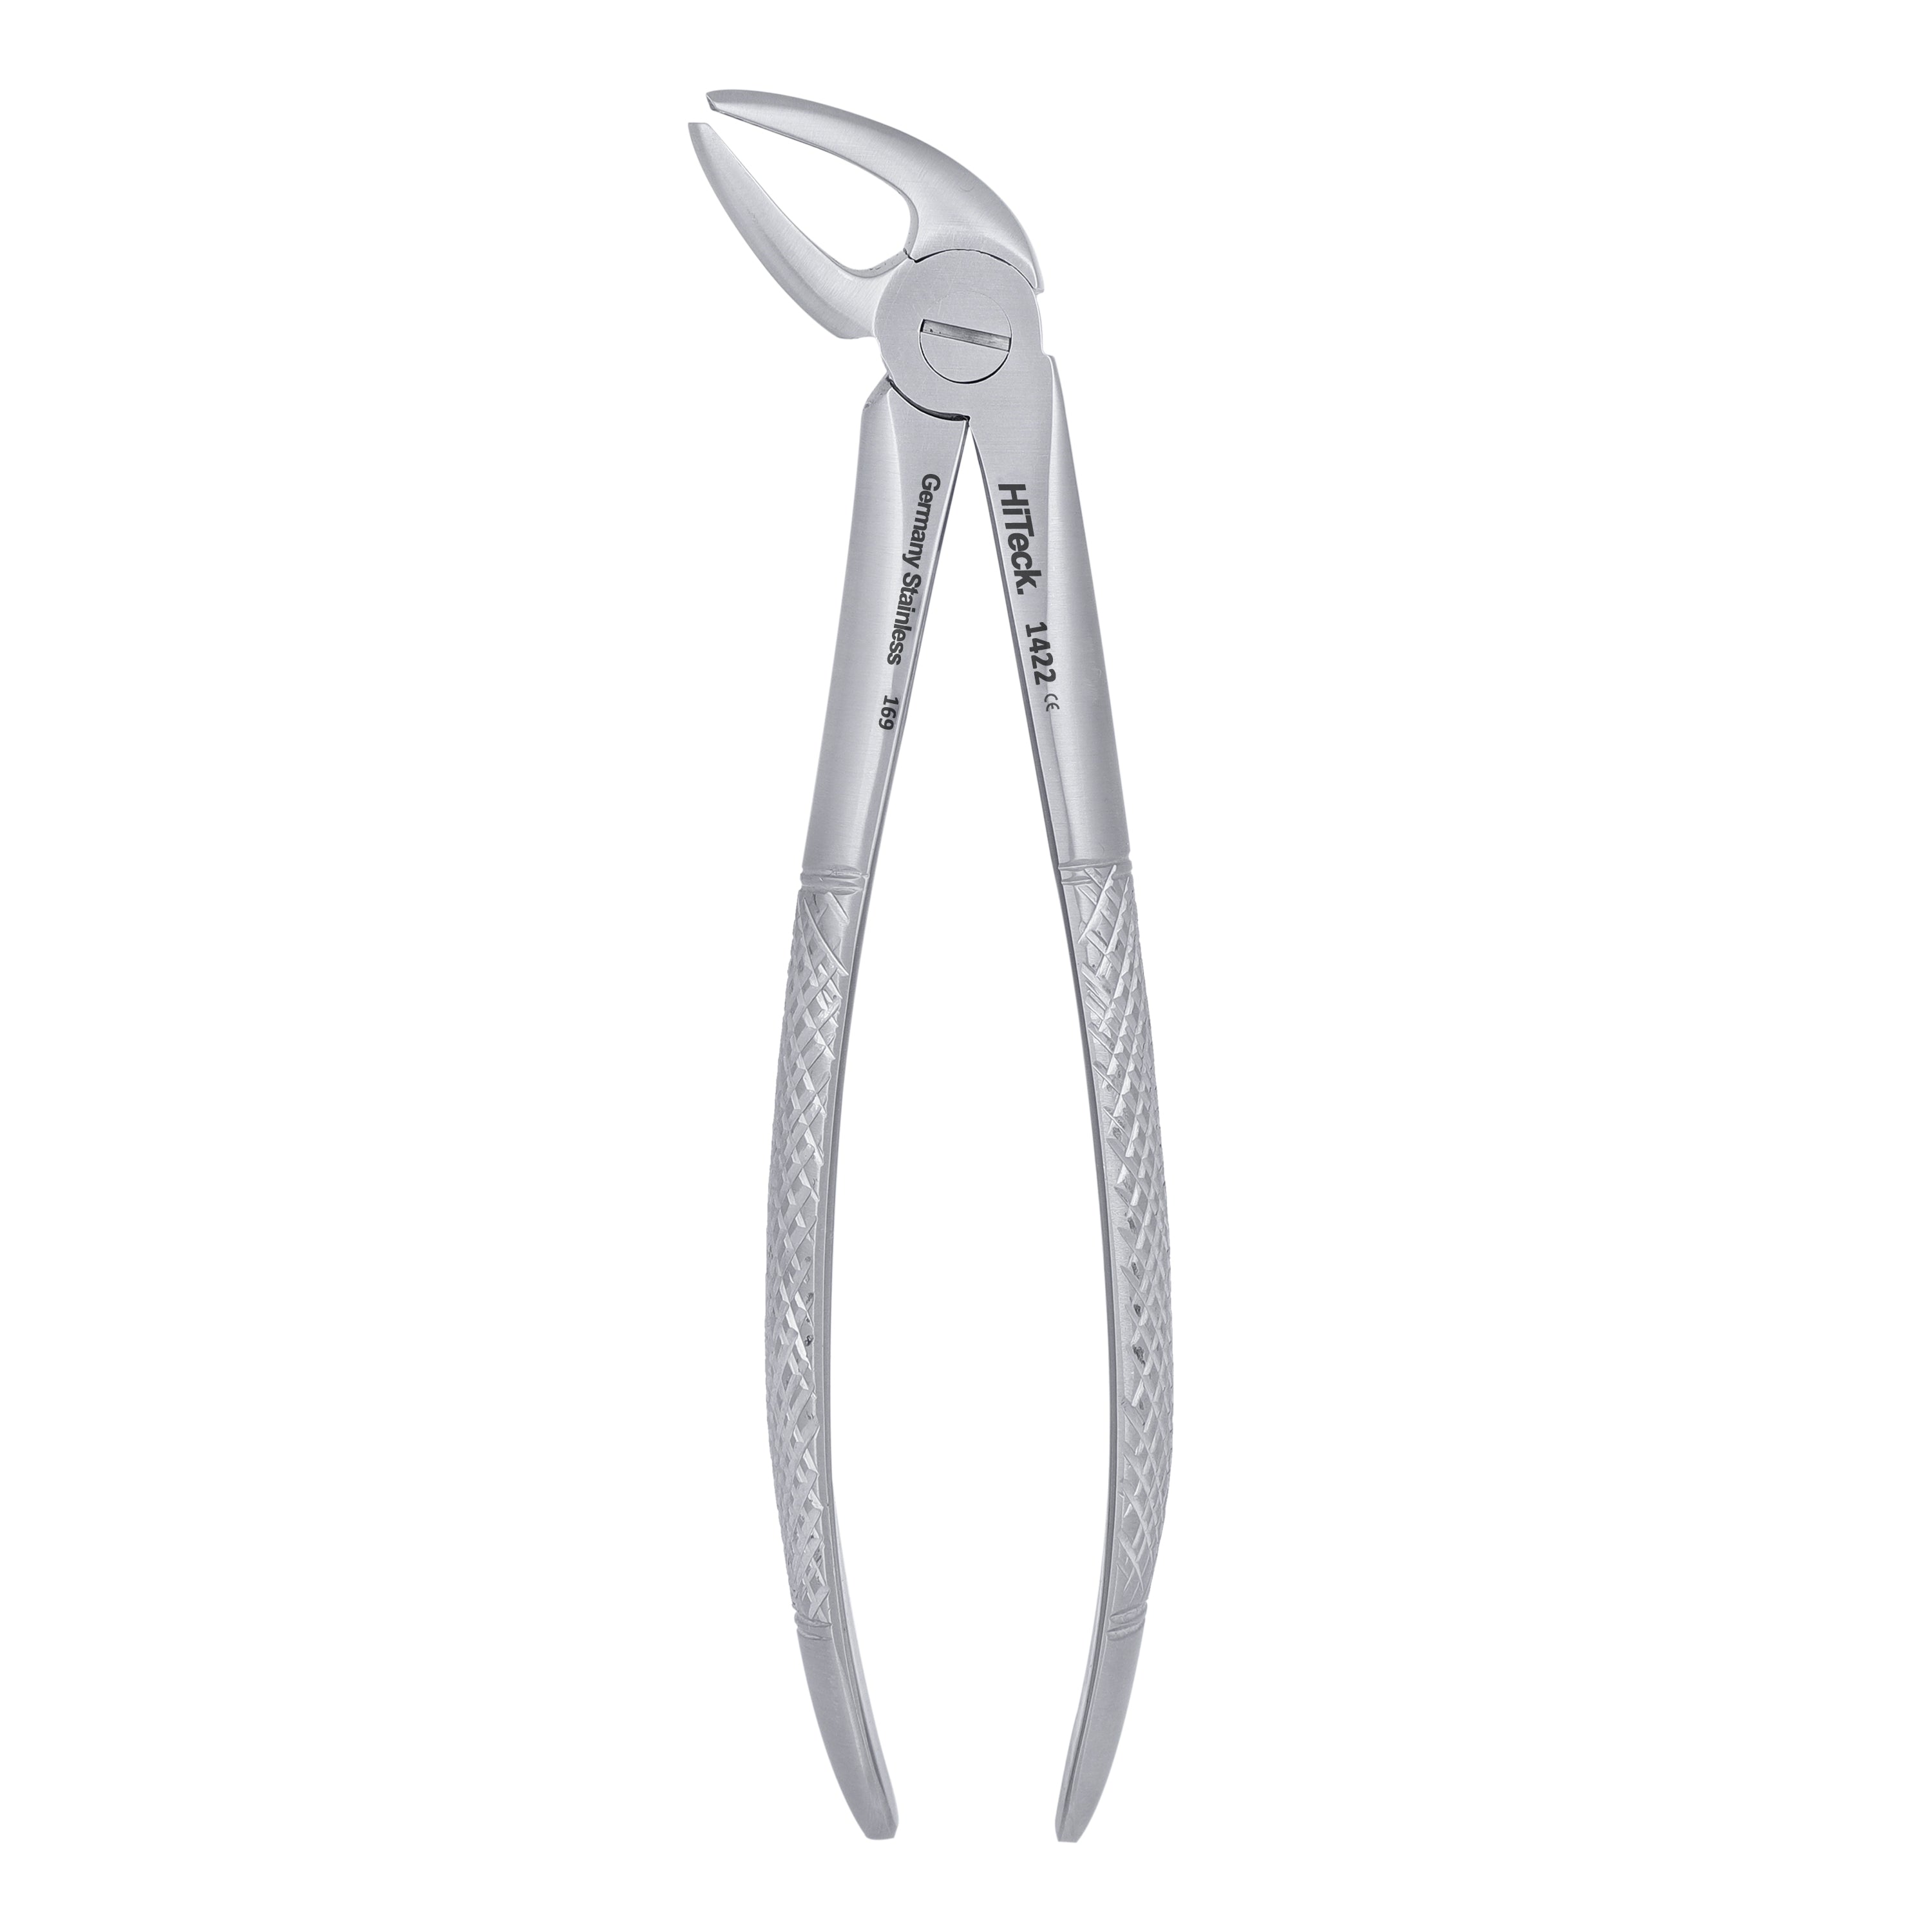 4 Lower Incisors, Canines Extraction Forcep - HiTeck Medical Instruments